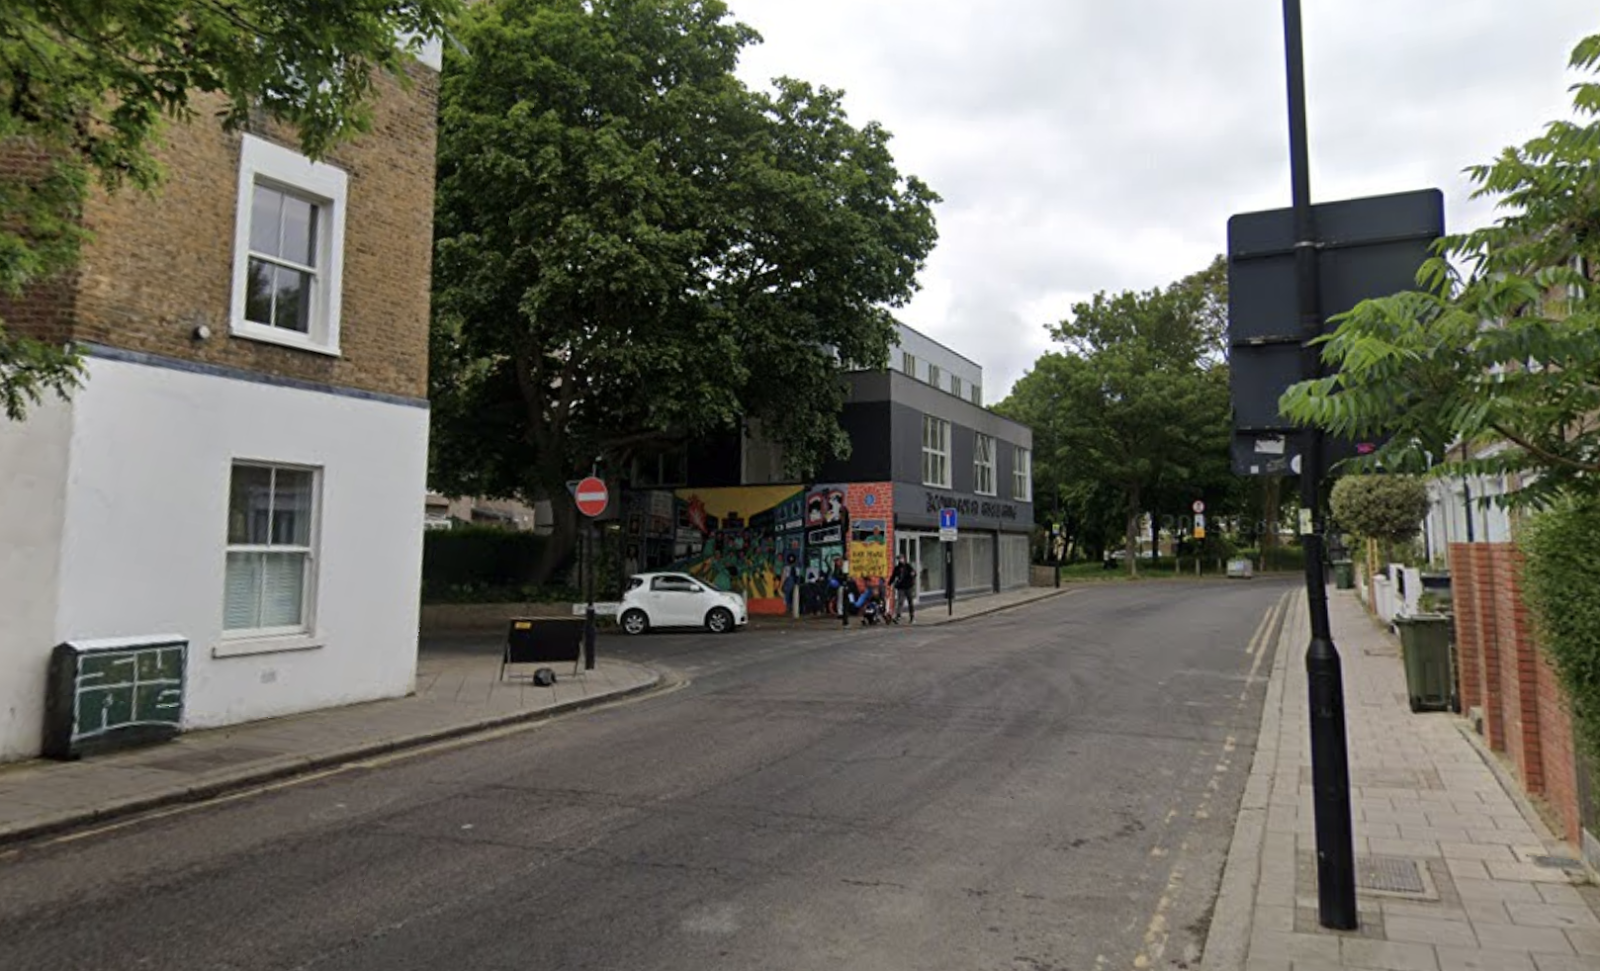 Google maps photograph of the intersection of Railton Road and Hurst Street showing a bright, colourful mural